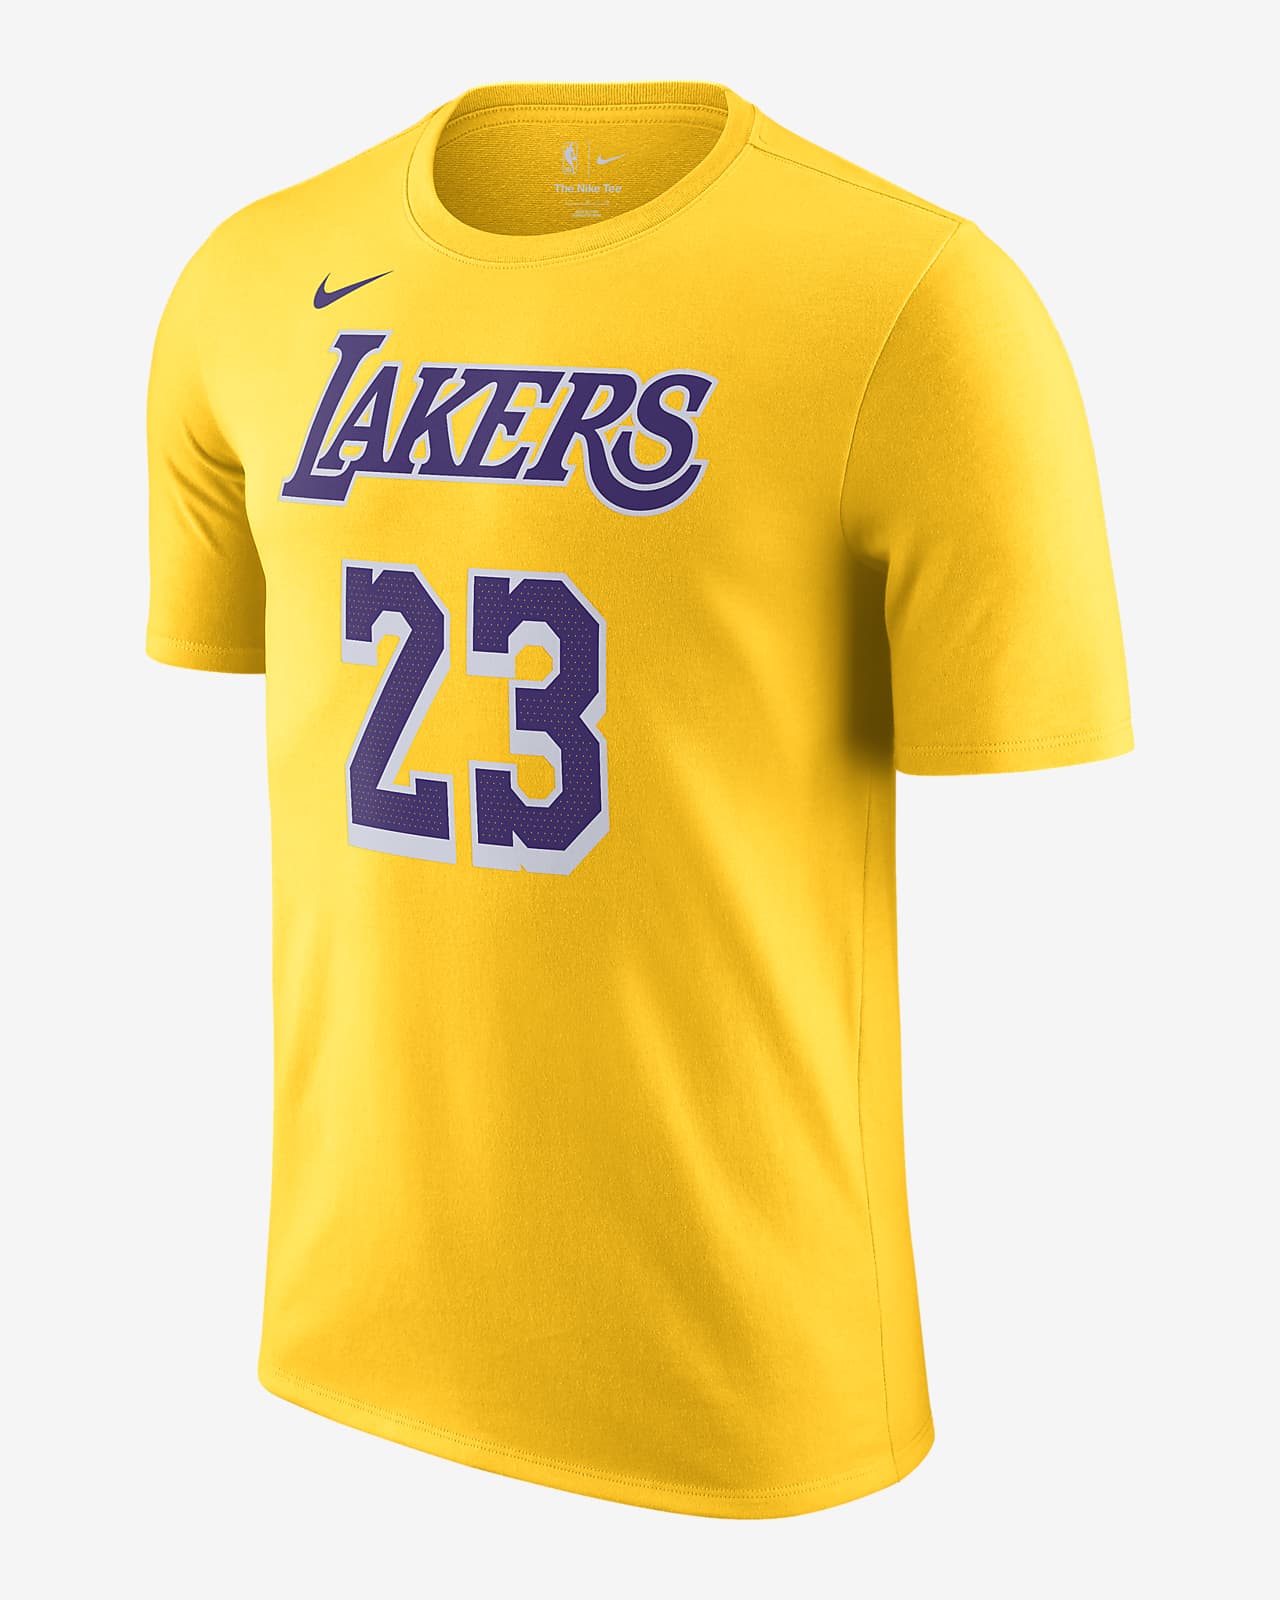 Tee-shirt Nike NBA Los Angeles Lakers pour Homme